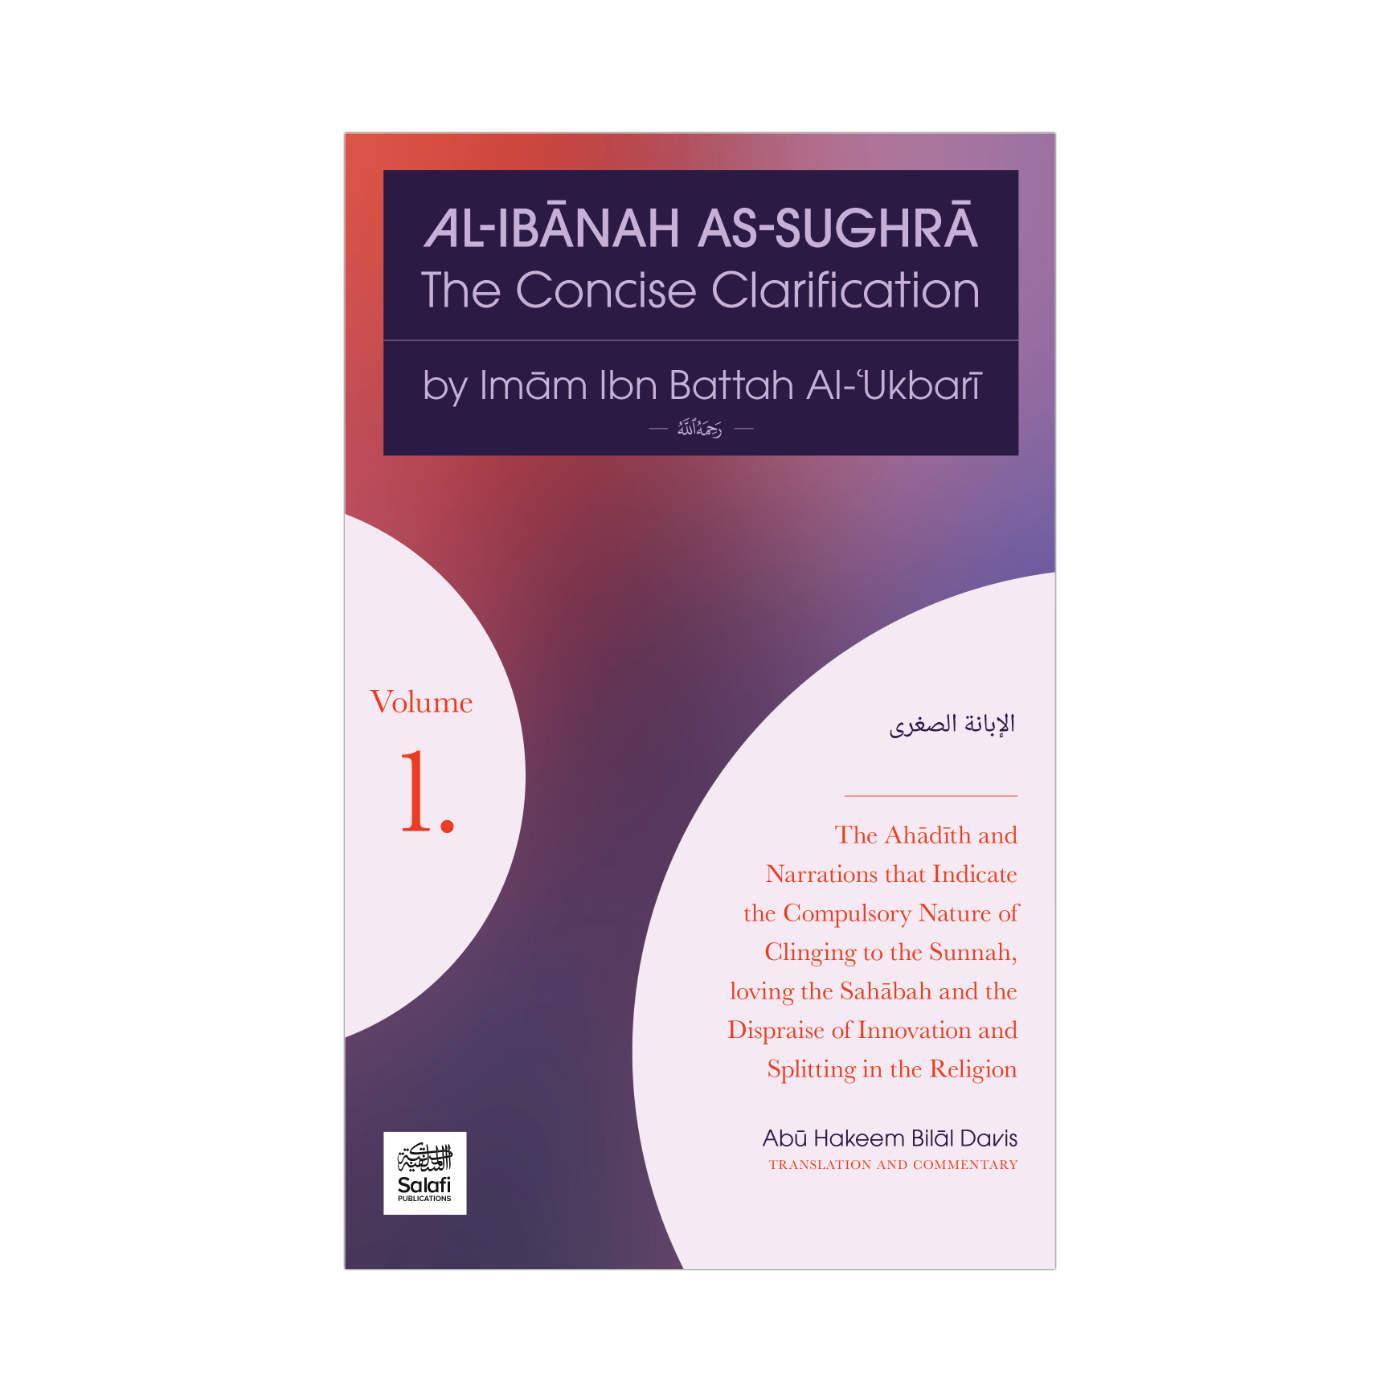 Al-Ibanah As-Sughra - The Concise Clarification